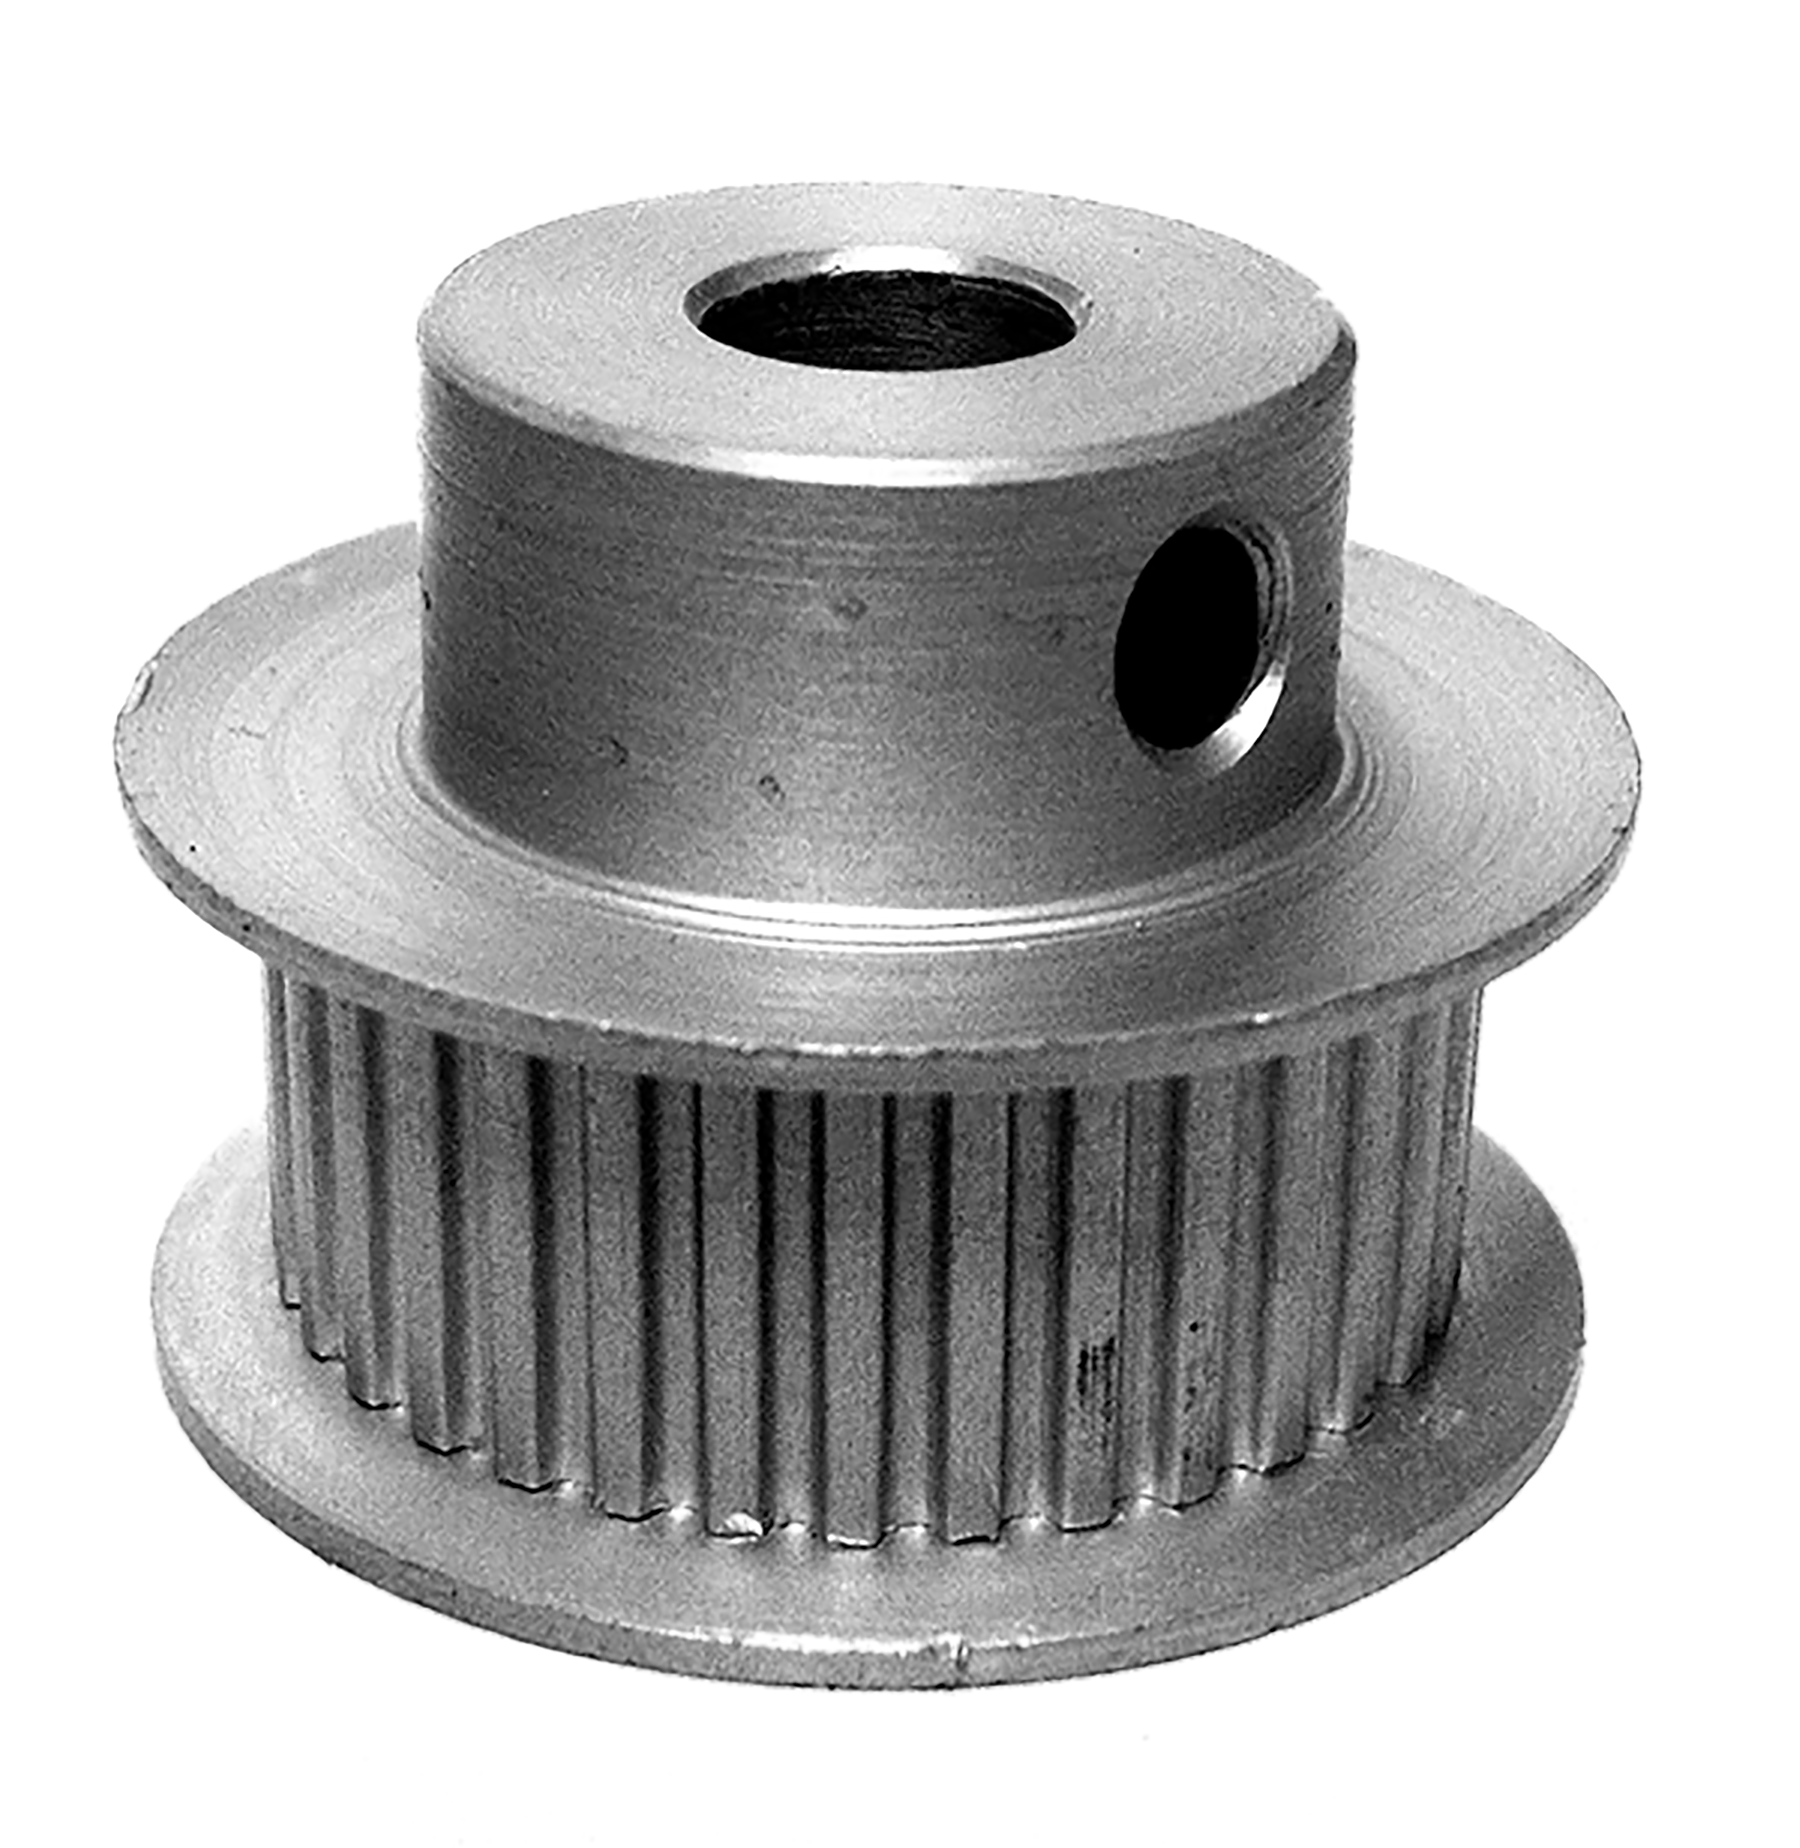 34LT312-6FA3 - Aluminum Imperial Pitch Pulleys